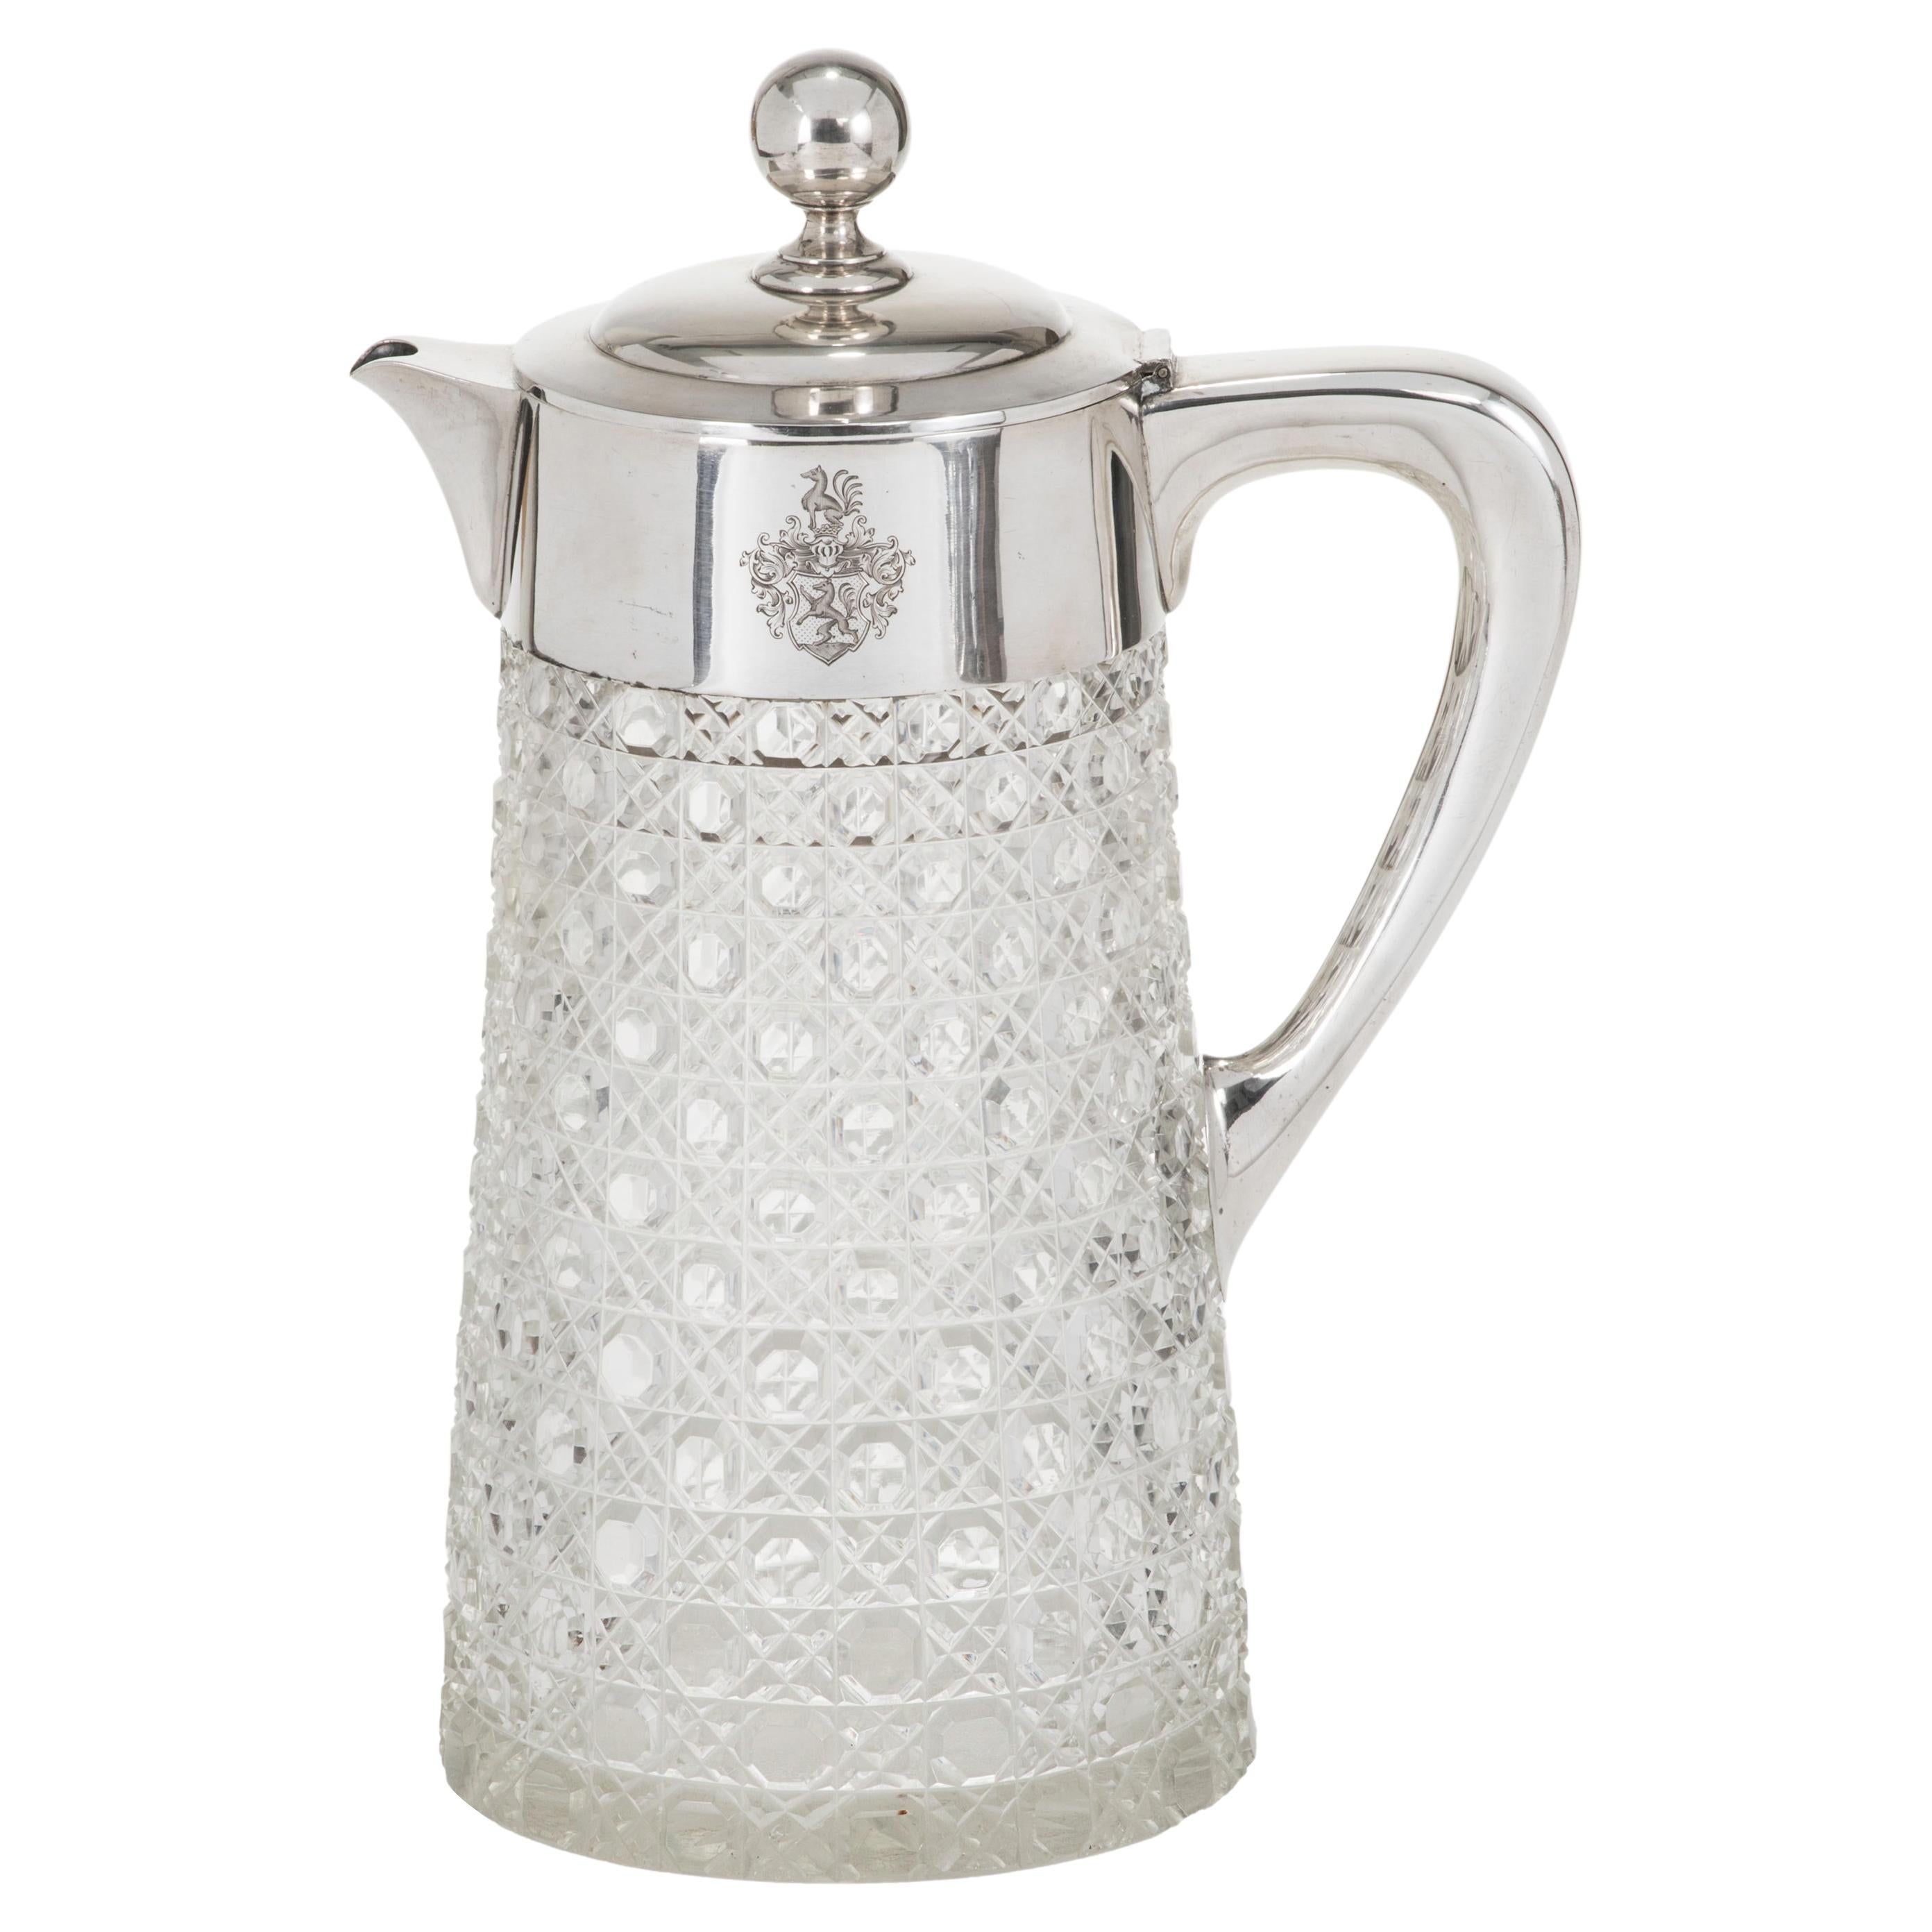 Crystal Pitcher with German Silver Handle and Lid